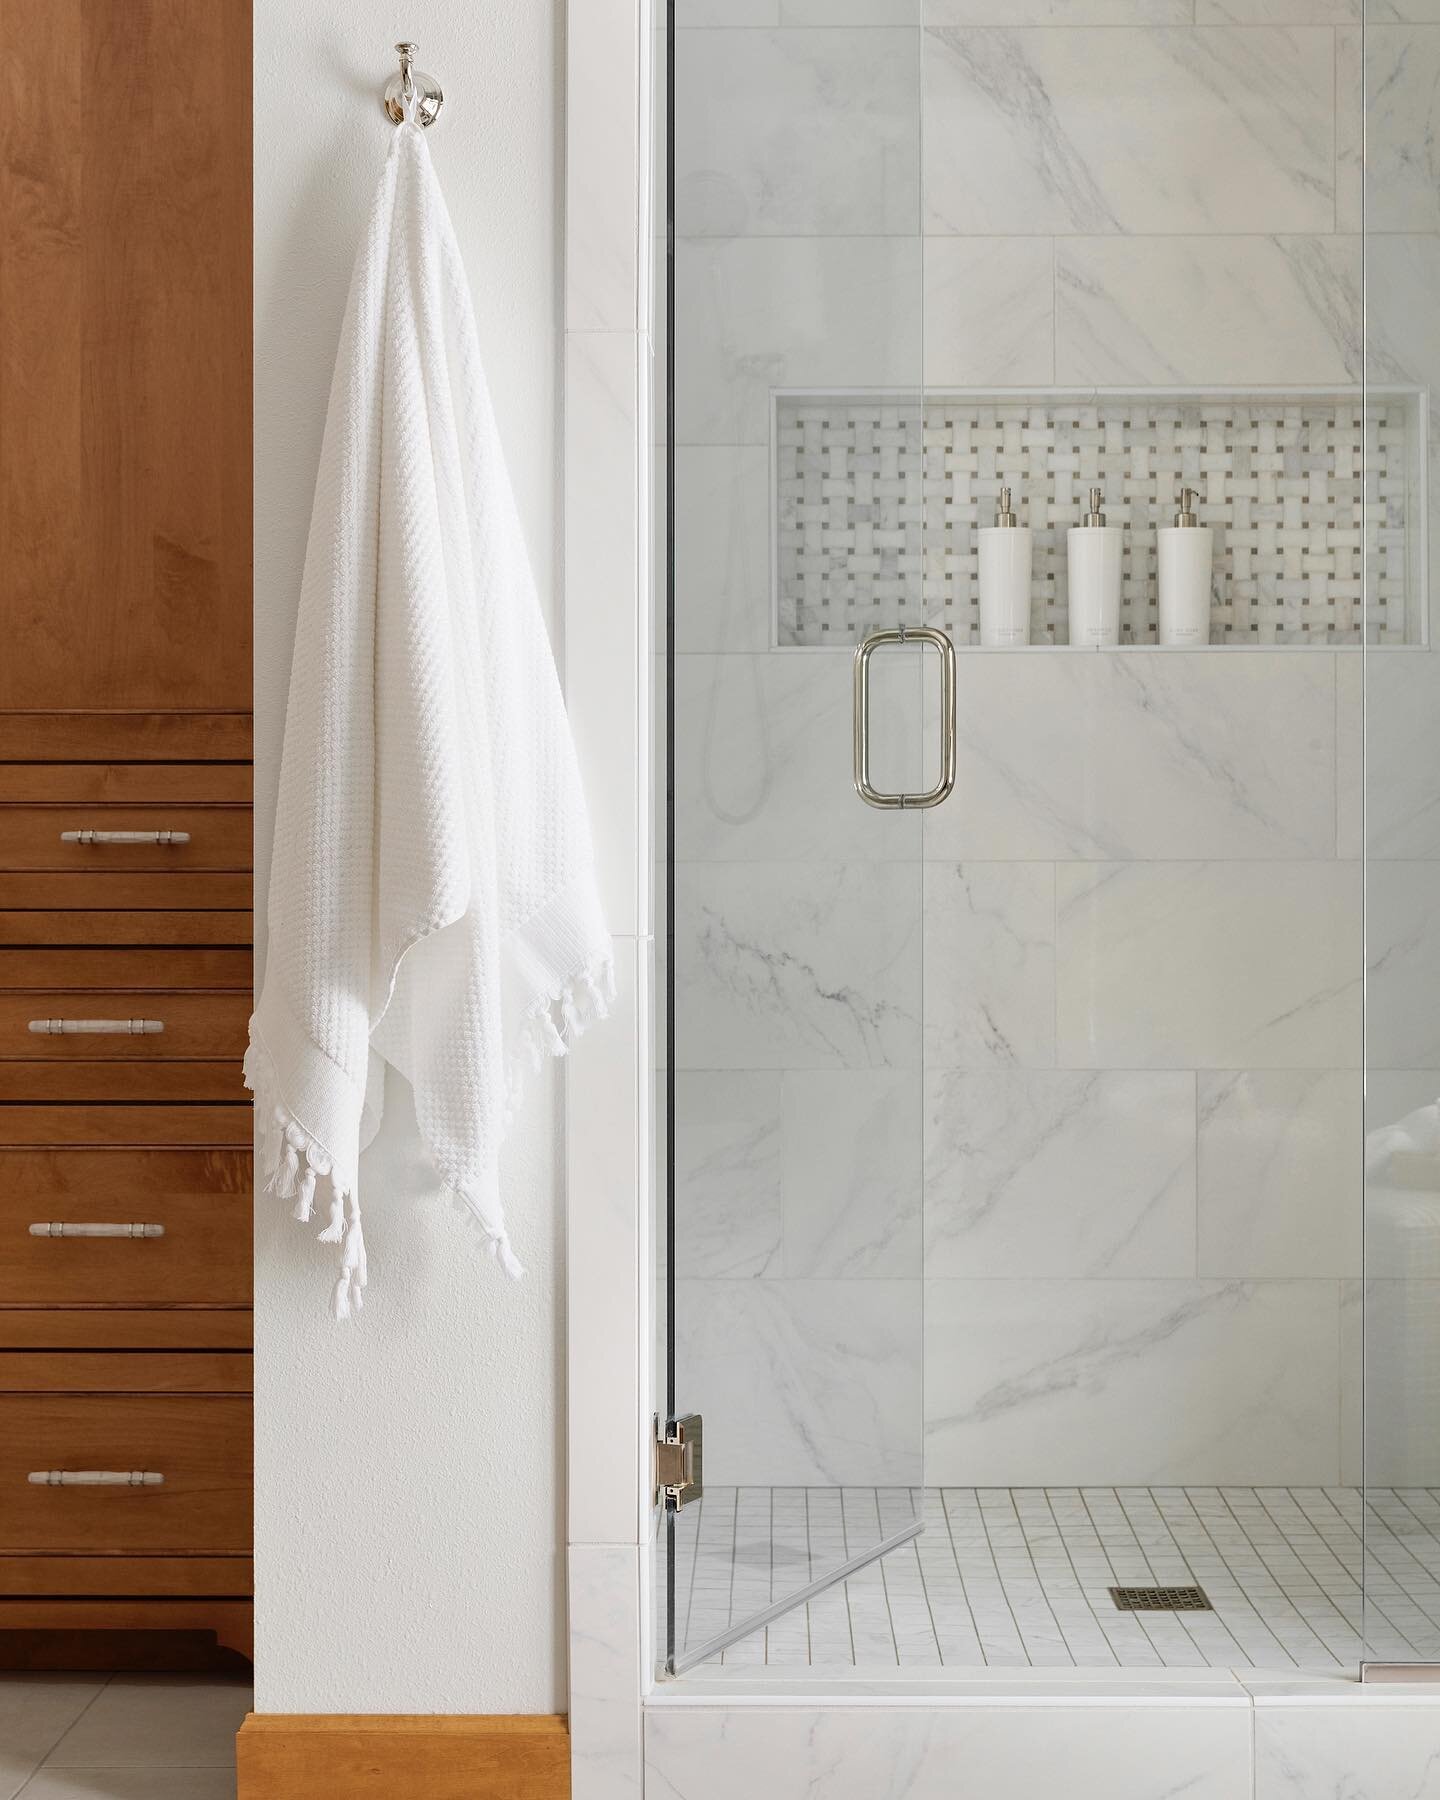 Shower goals. Crisp, clean and functional. Who wouldn&rsquo;t love getting ready for your day in this beautiful master bathroom?  Photo credit: spacecrafting_photography#christyleehome#eauclairewi #bathroomremodel #marblelook #bathroomdesign